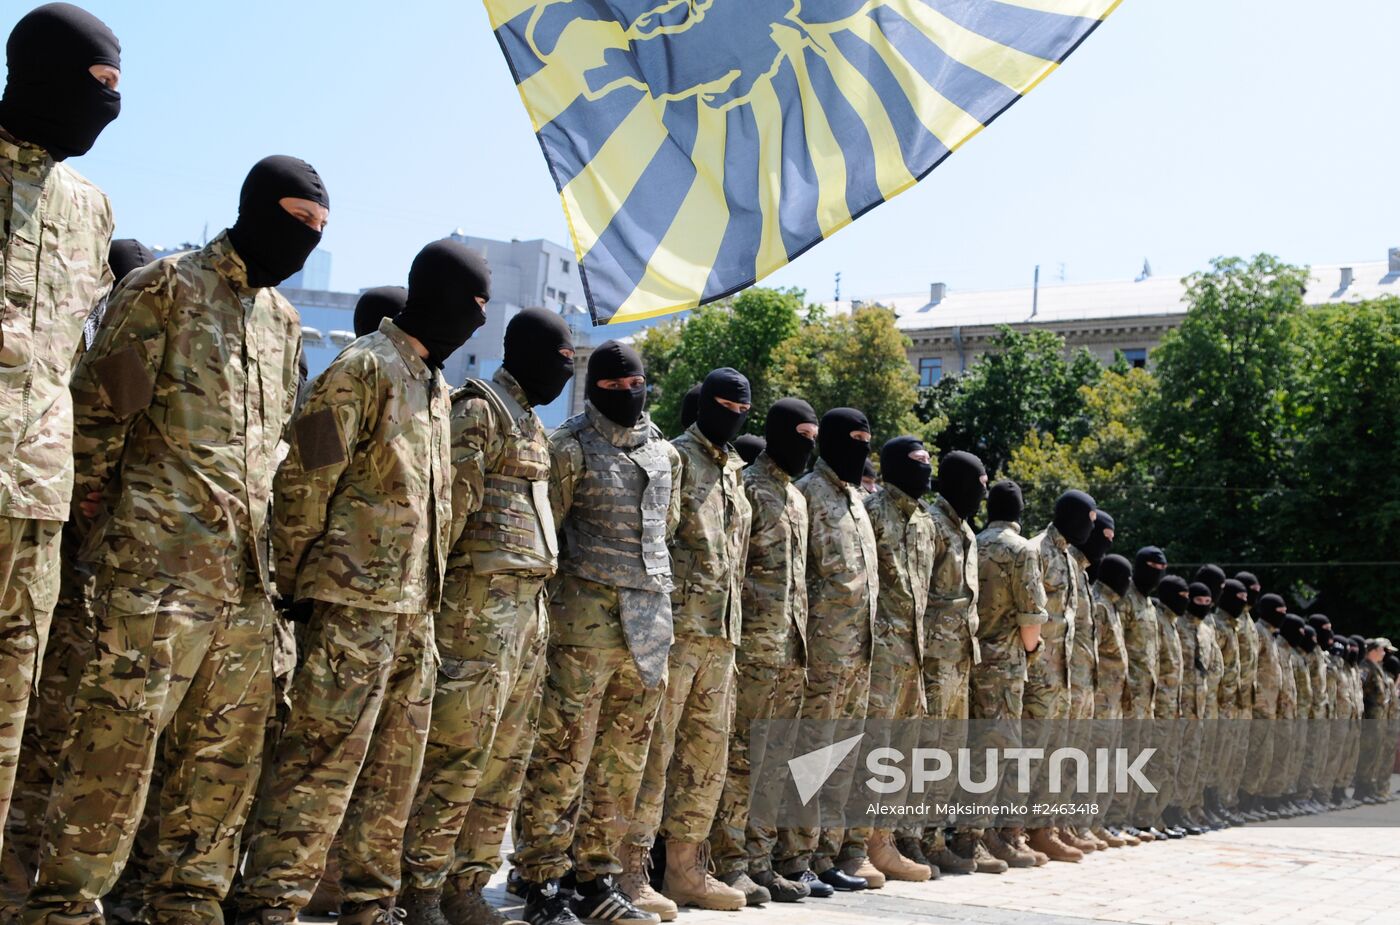 Azov battalion soldiers take oath in Kiev before being sent to Donbass